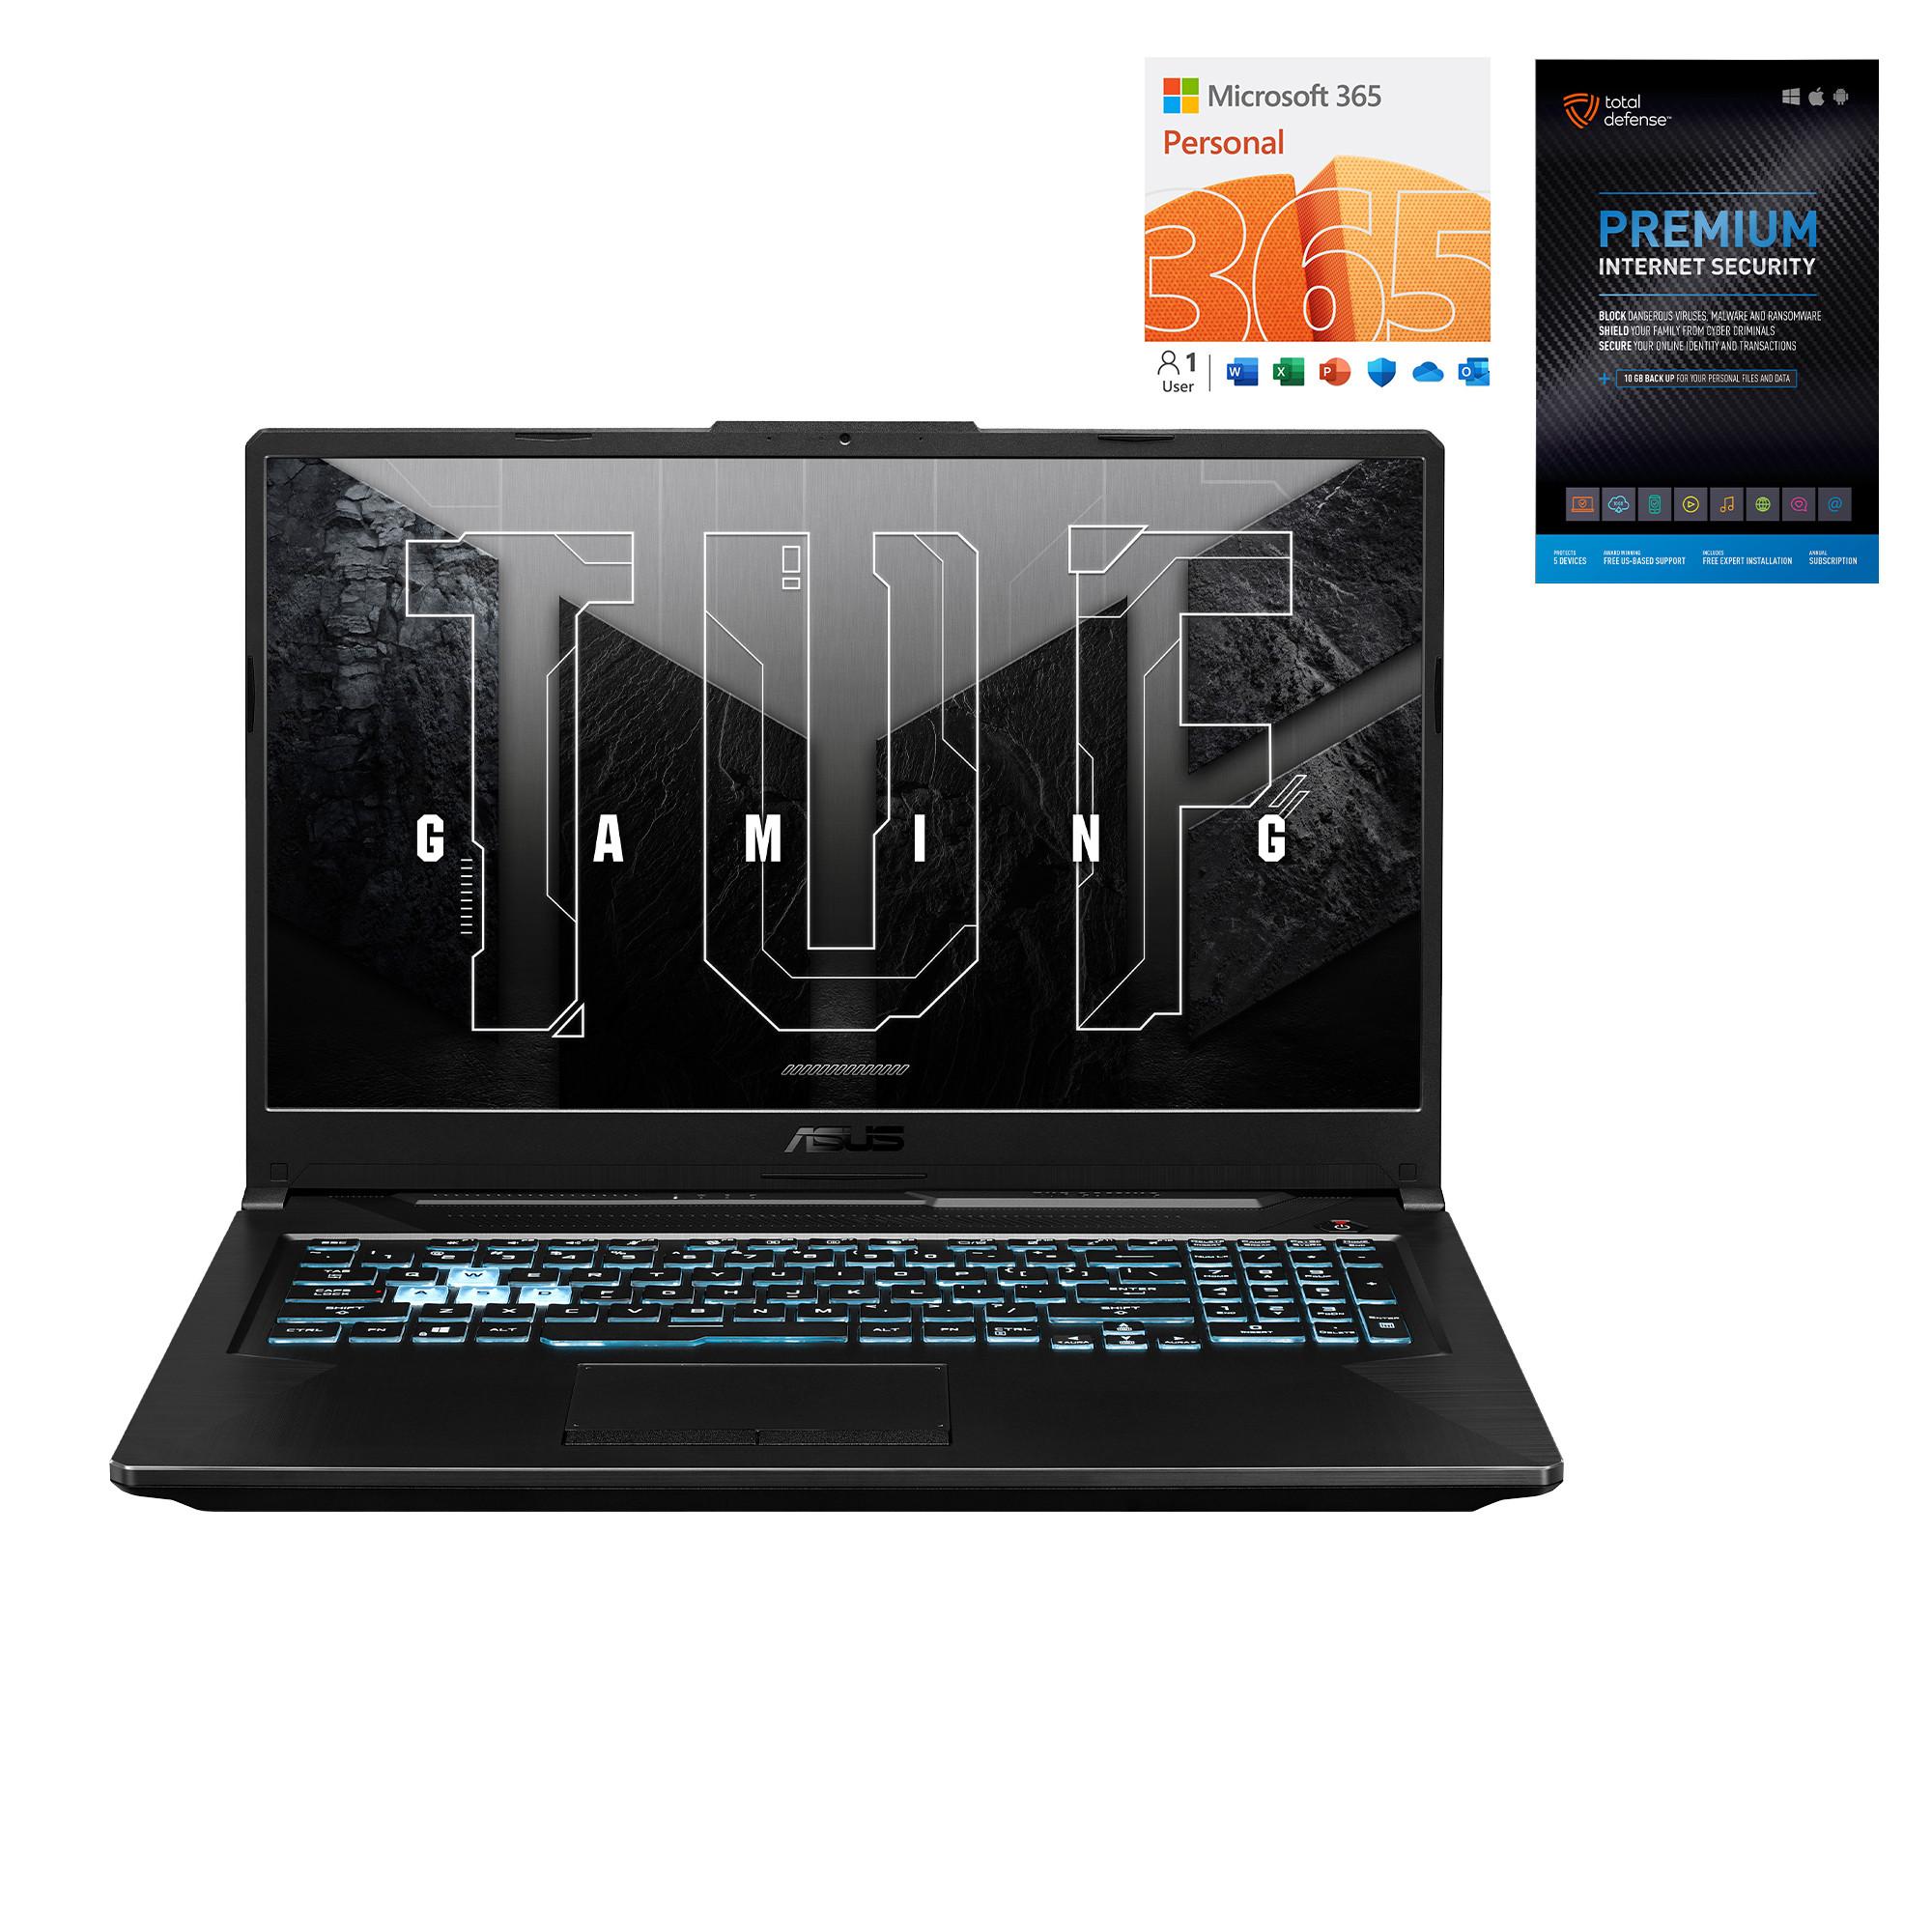 Rent to Own ASUS 17 ASUS TUF Gaming Laptop w/ Total Defense u0026 Office 365  at Aaron's today!